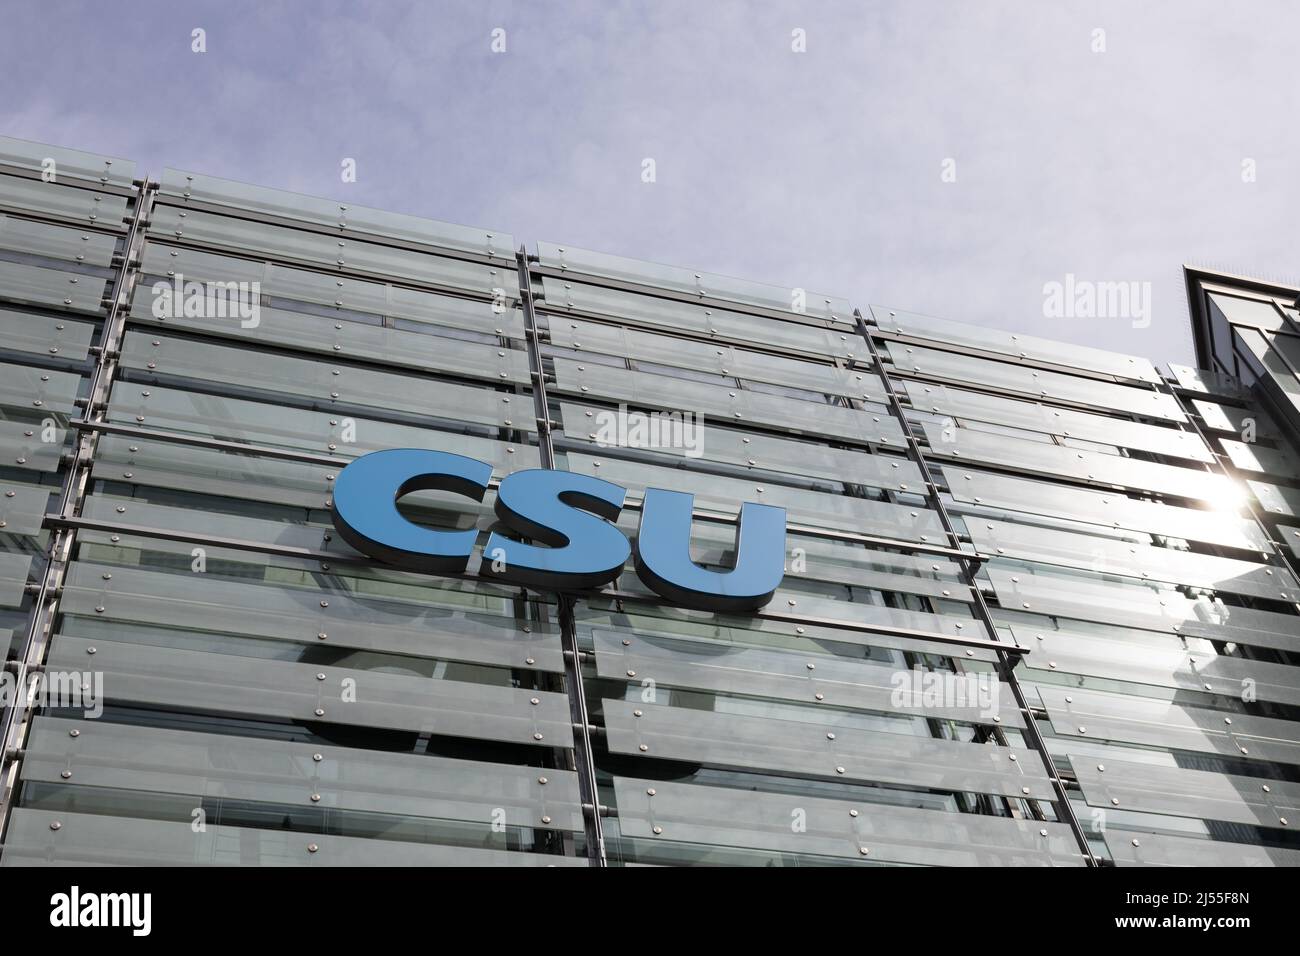 Munich, GERMANY - April 19, 2022: The letters CSU on the facade of the 'Franz-Josef-Strauss' building in Munich, the headquarter of the bavarian party Stock Photo